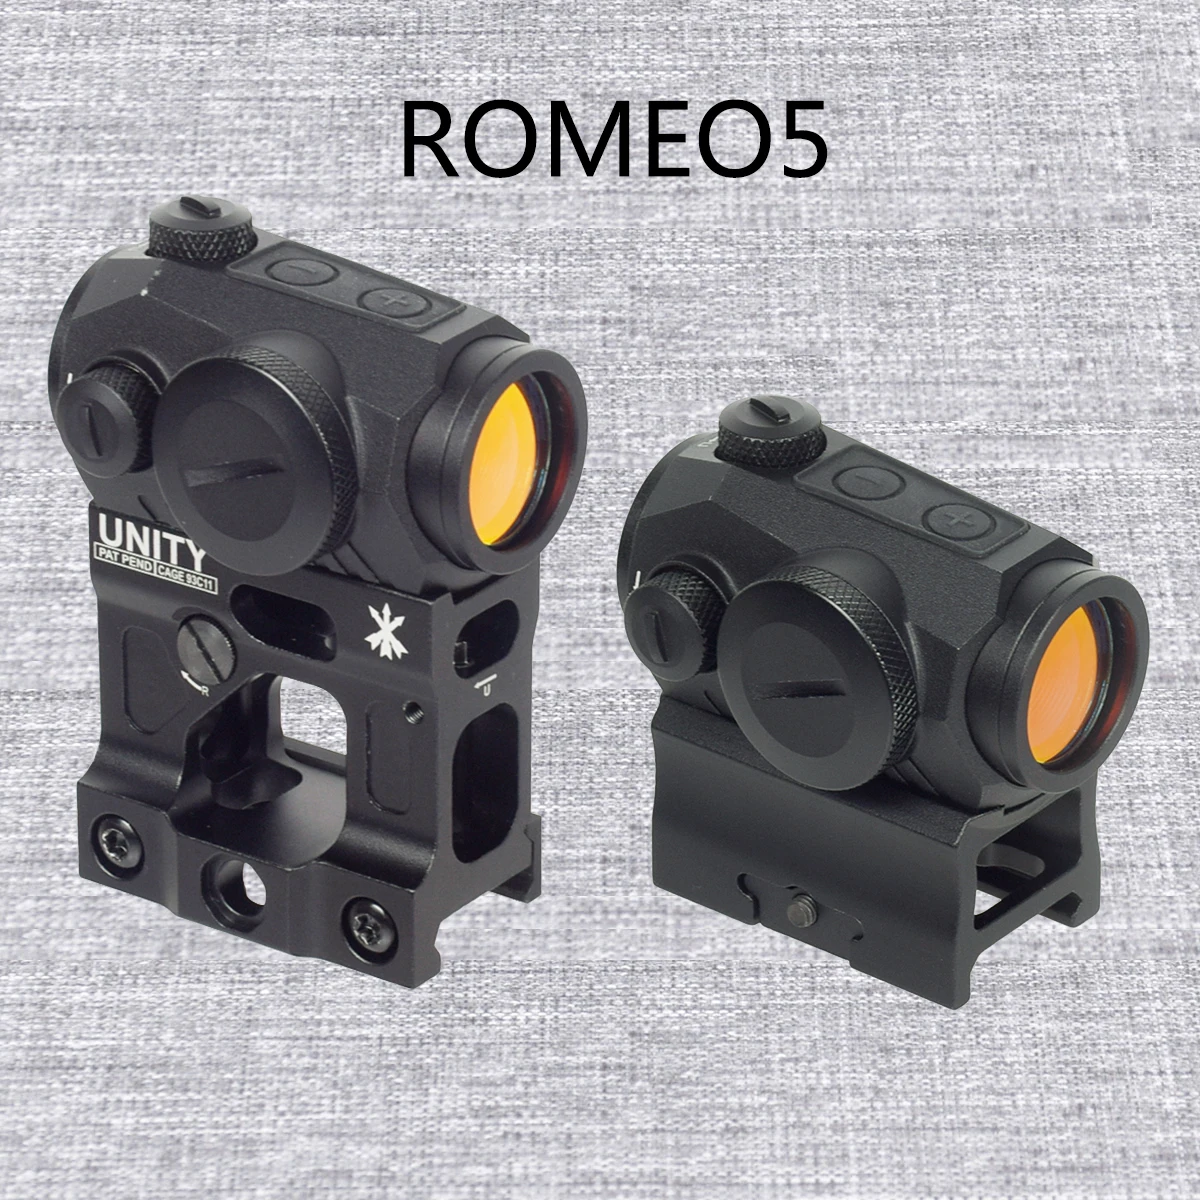 

Tactical ROMEO5 Red Dot Sight Holographic Reflex Compact 2 MOA Airsoft Riflescope Hunting Scope With UNITY Riser Mount